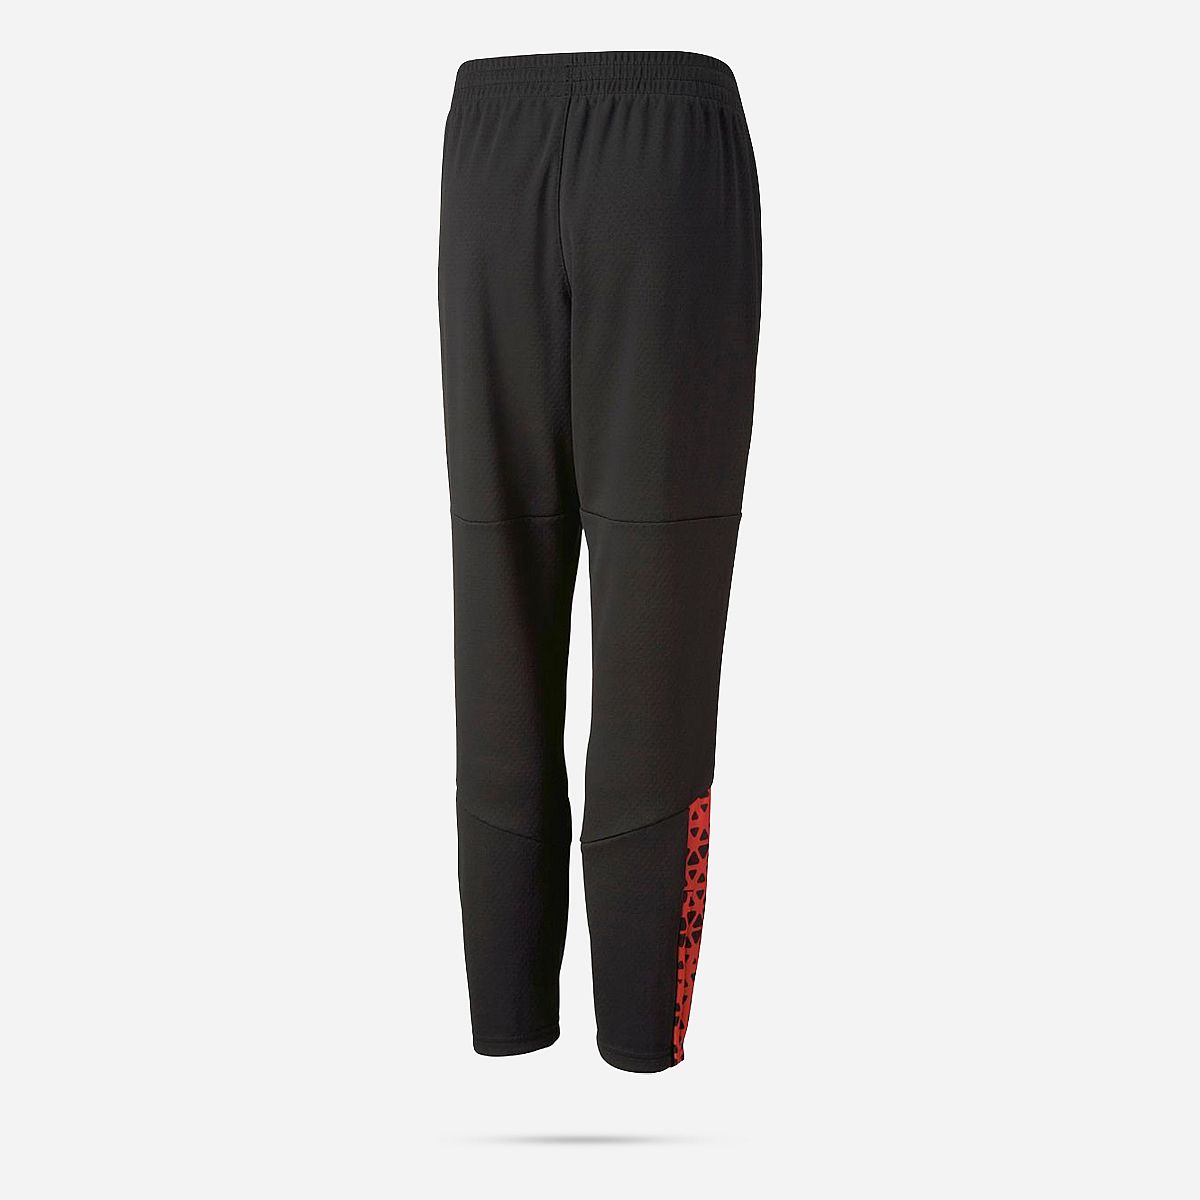 AN296452 Individualcup Training Pants